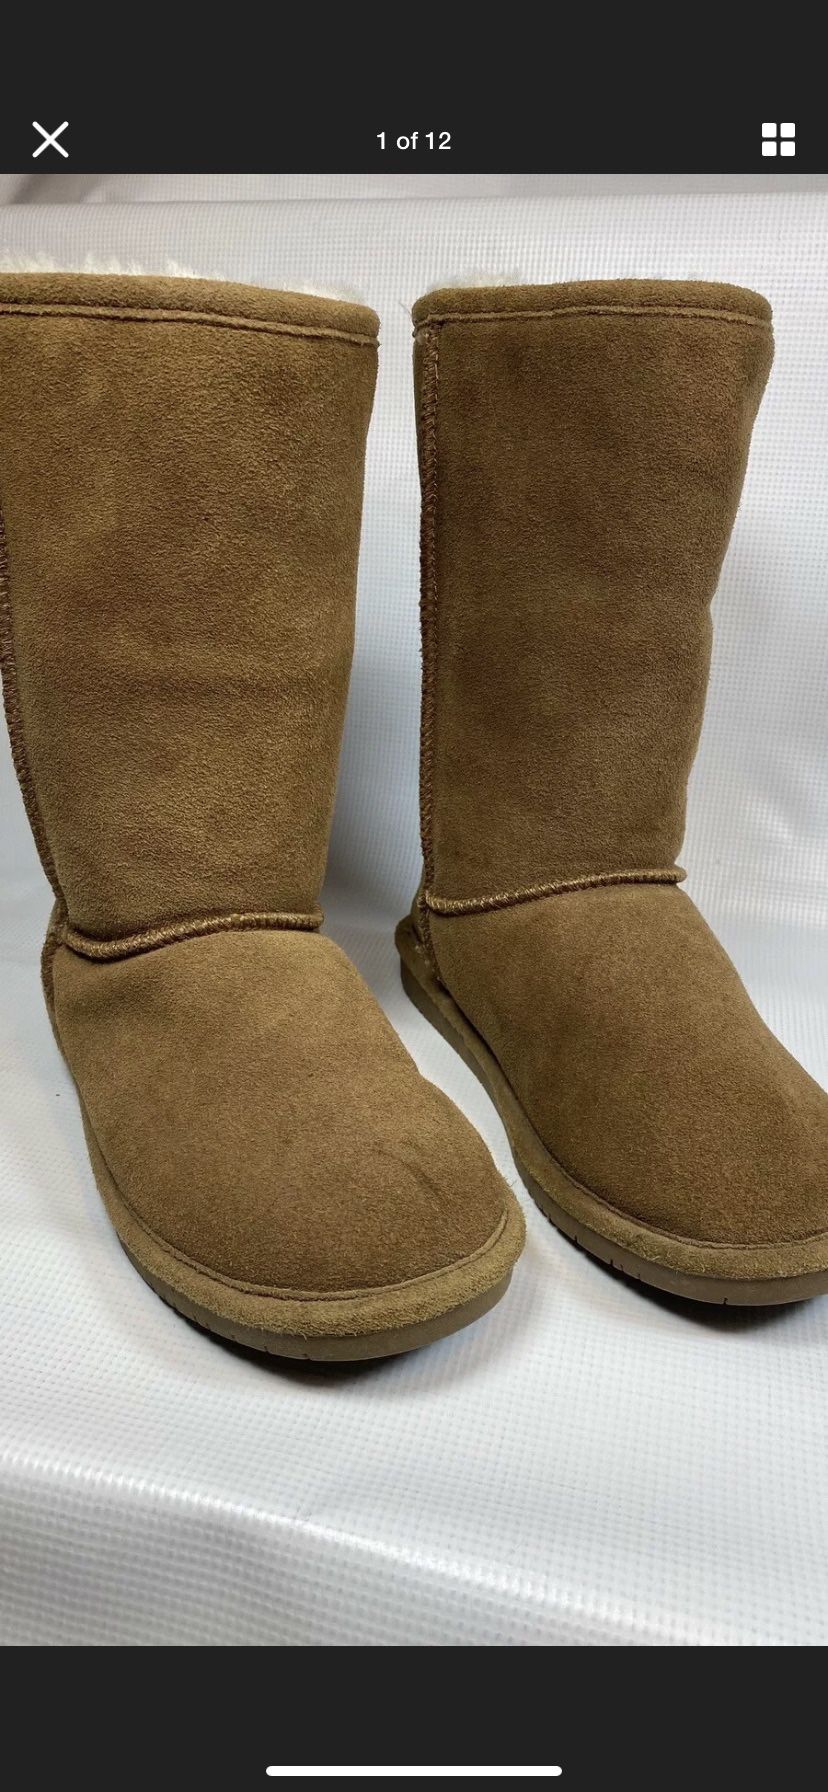 Bear Paw, Women’s Classic Hickory Colored Boots, Brow, Size 7.